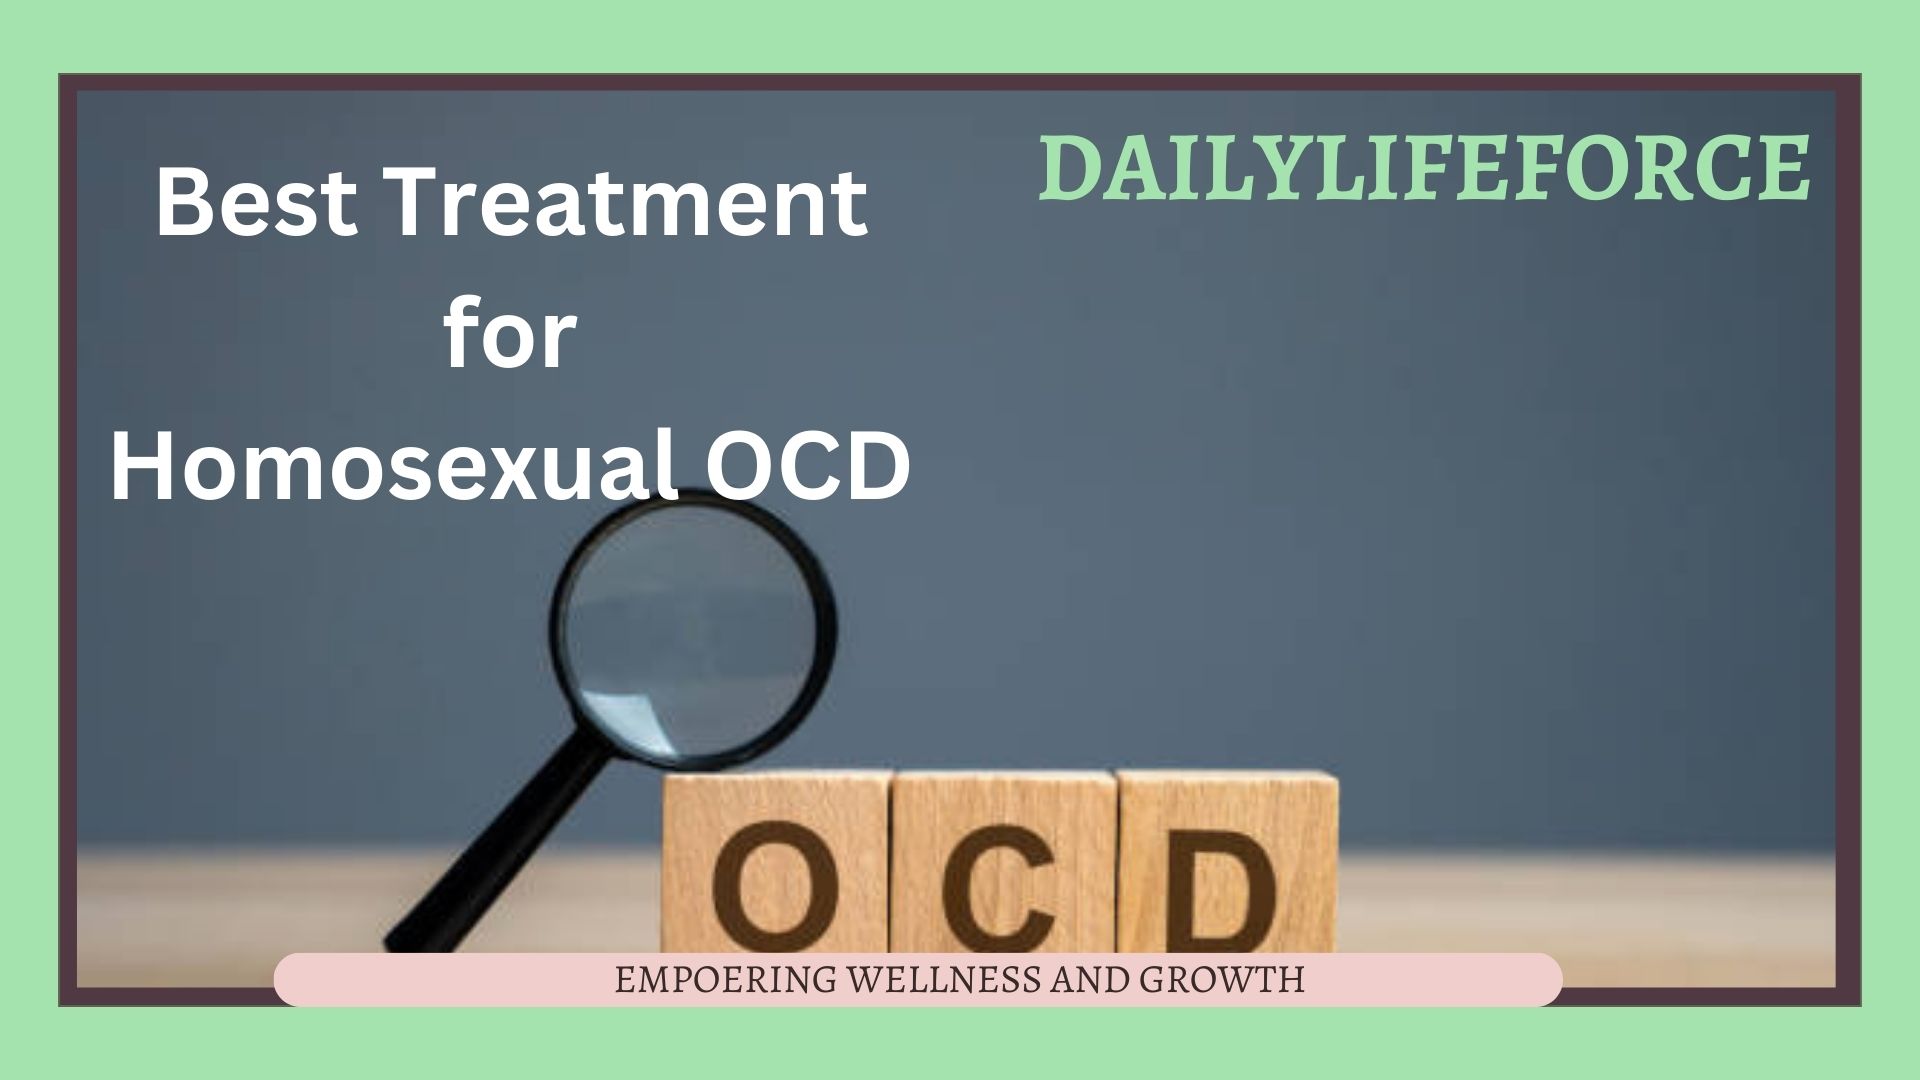 Best Treatment for Homosexual OCD